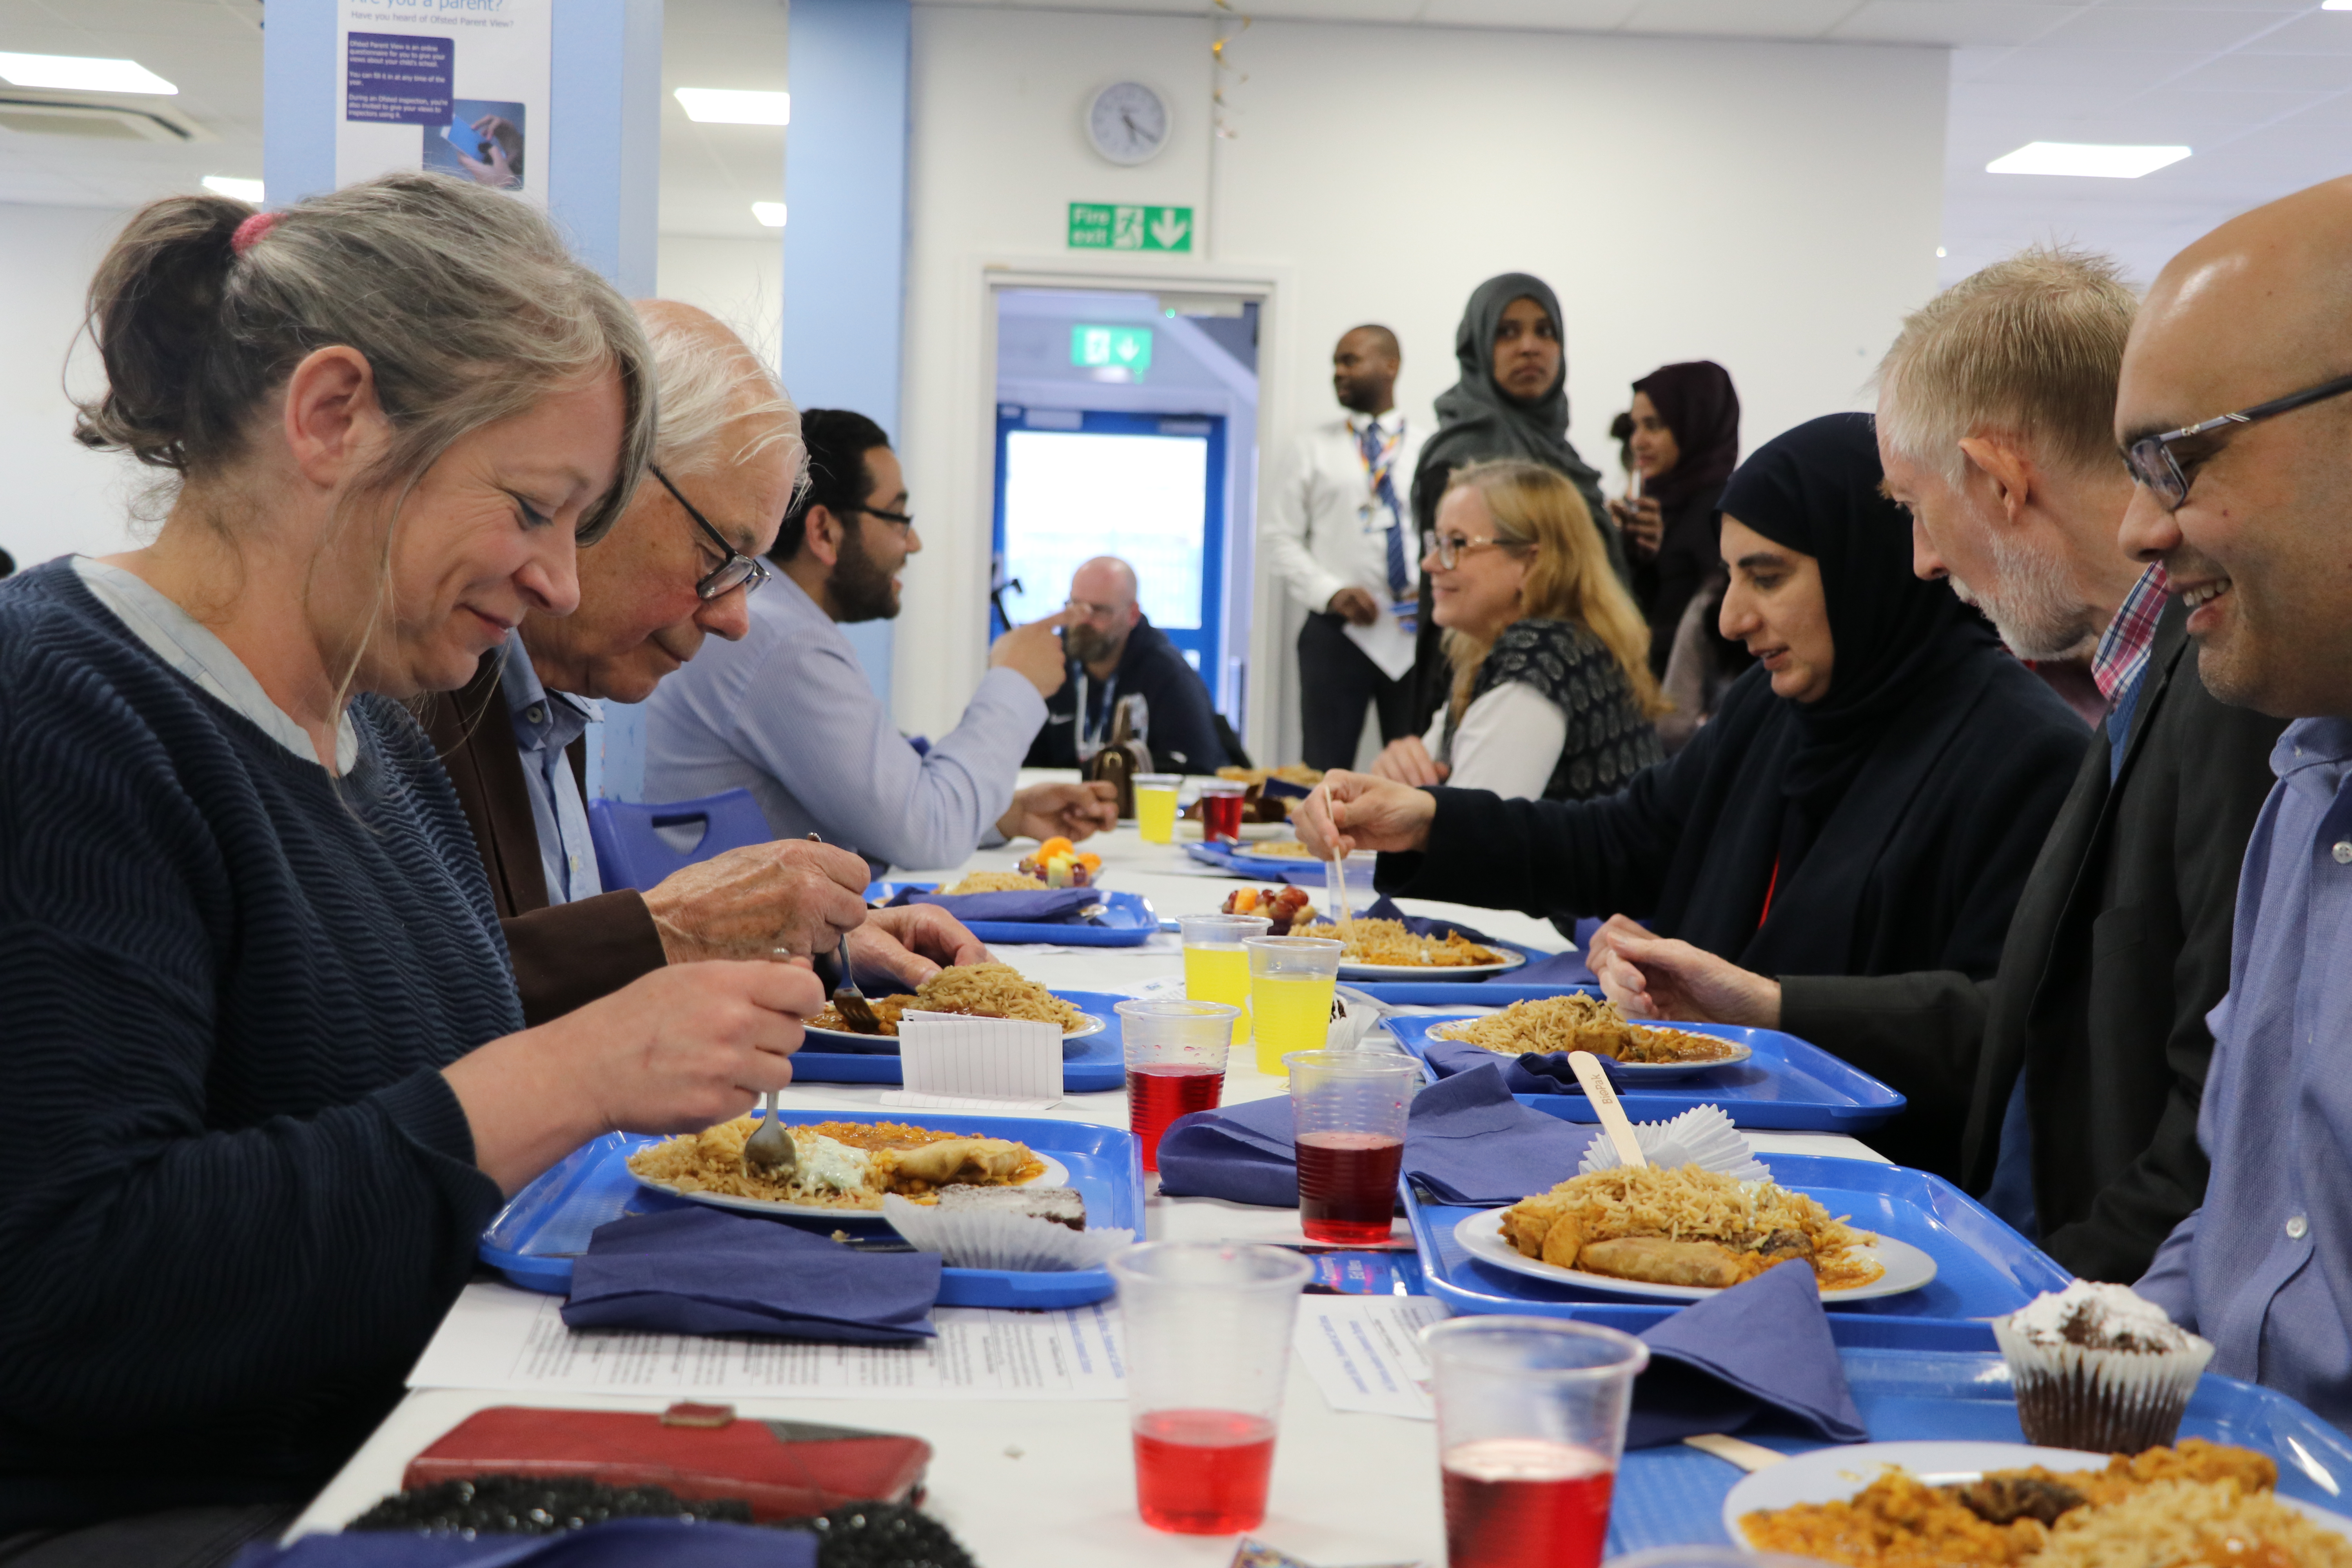 Image for news item 'Community Eid Meal'